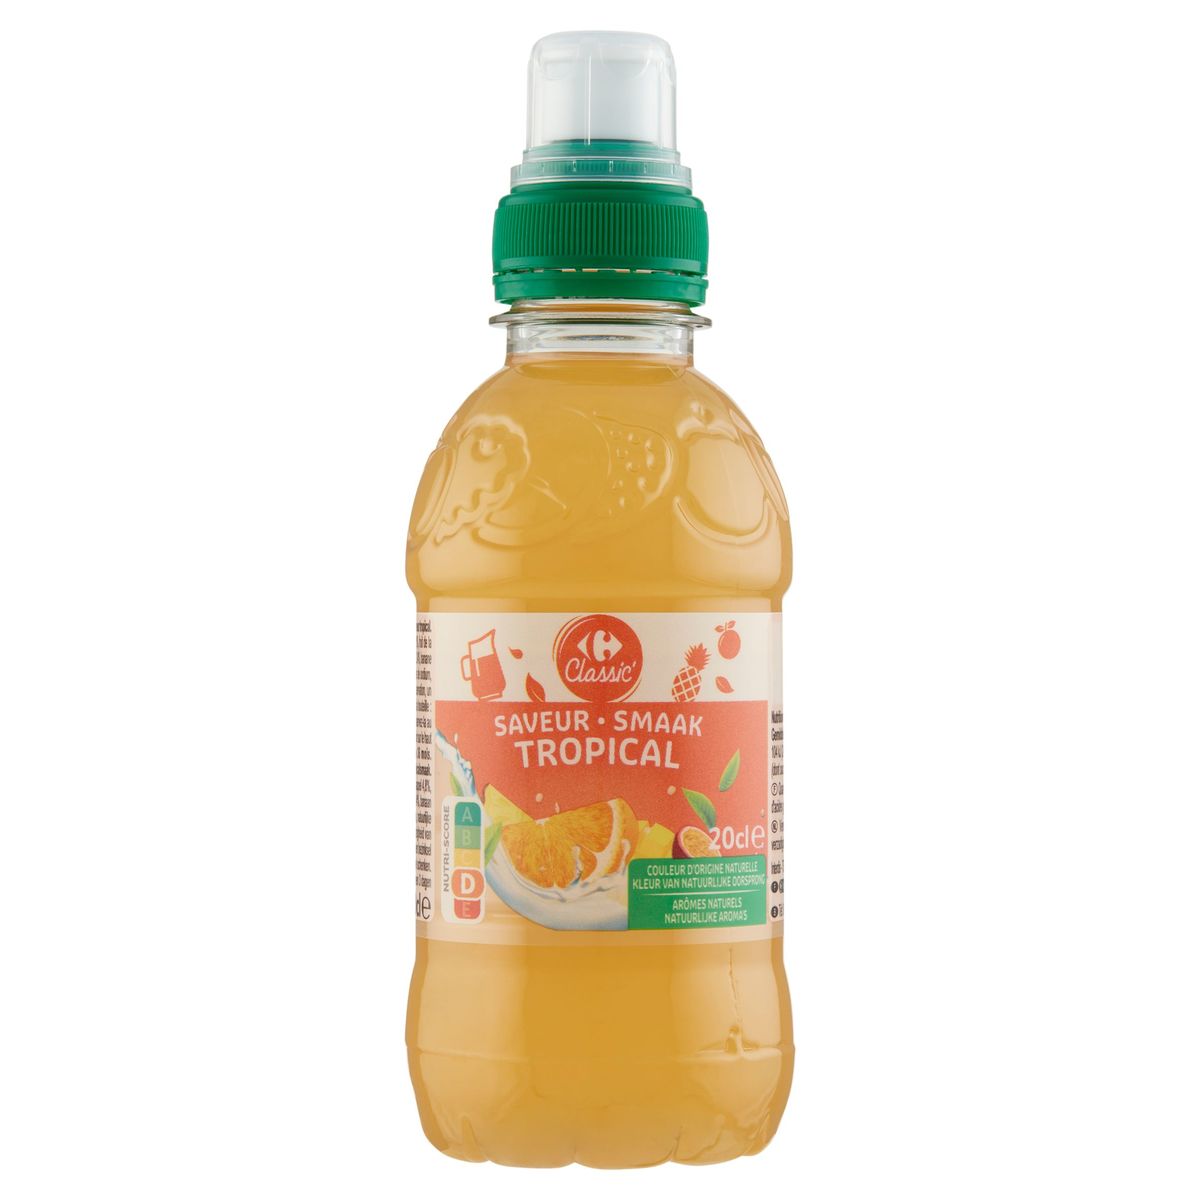 Carrefour Classic' Smaak Tropical 20 cl